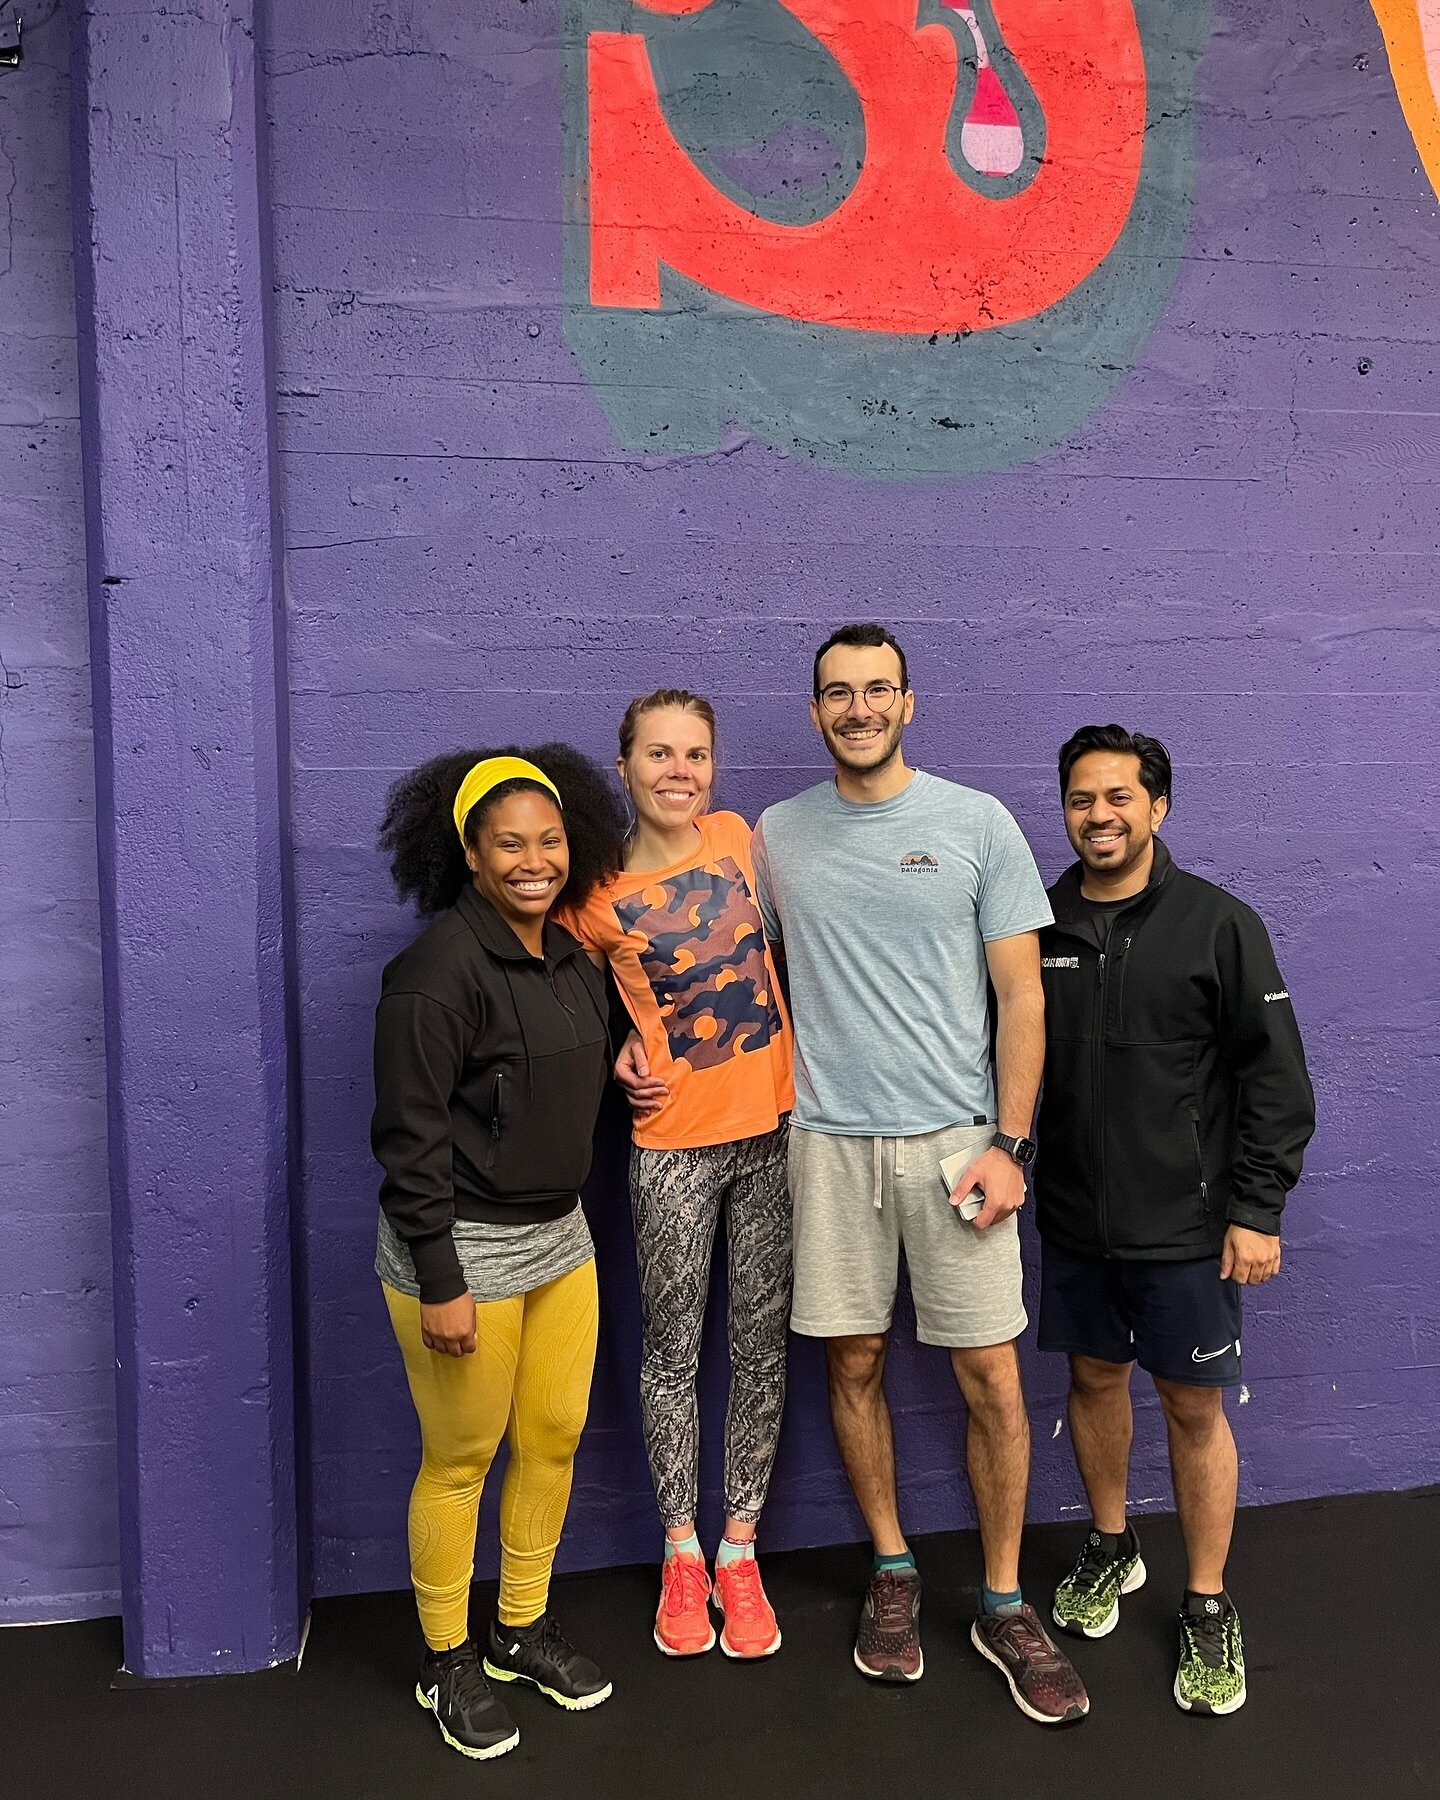 Say what&rsquo;s up to this morning&rsquo;s Free Intro class with Coach Amber! Also say what&rsquo;s up to Coach Amber&rsquo;s sweet yellow leggings and headband 🍋 
.
.
.
#introtocrossfit #crossfitintro #crossfitsanfrancisco #crossfitsouthpark